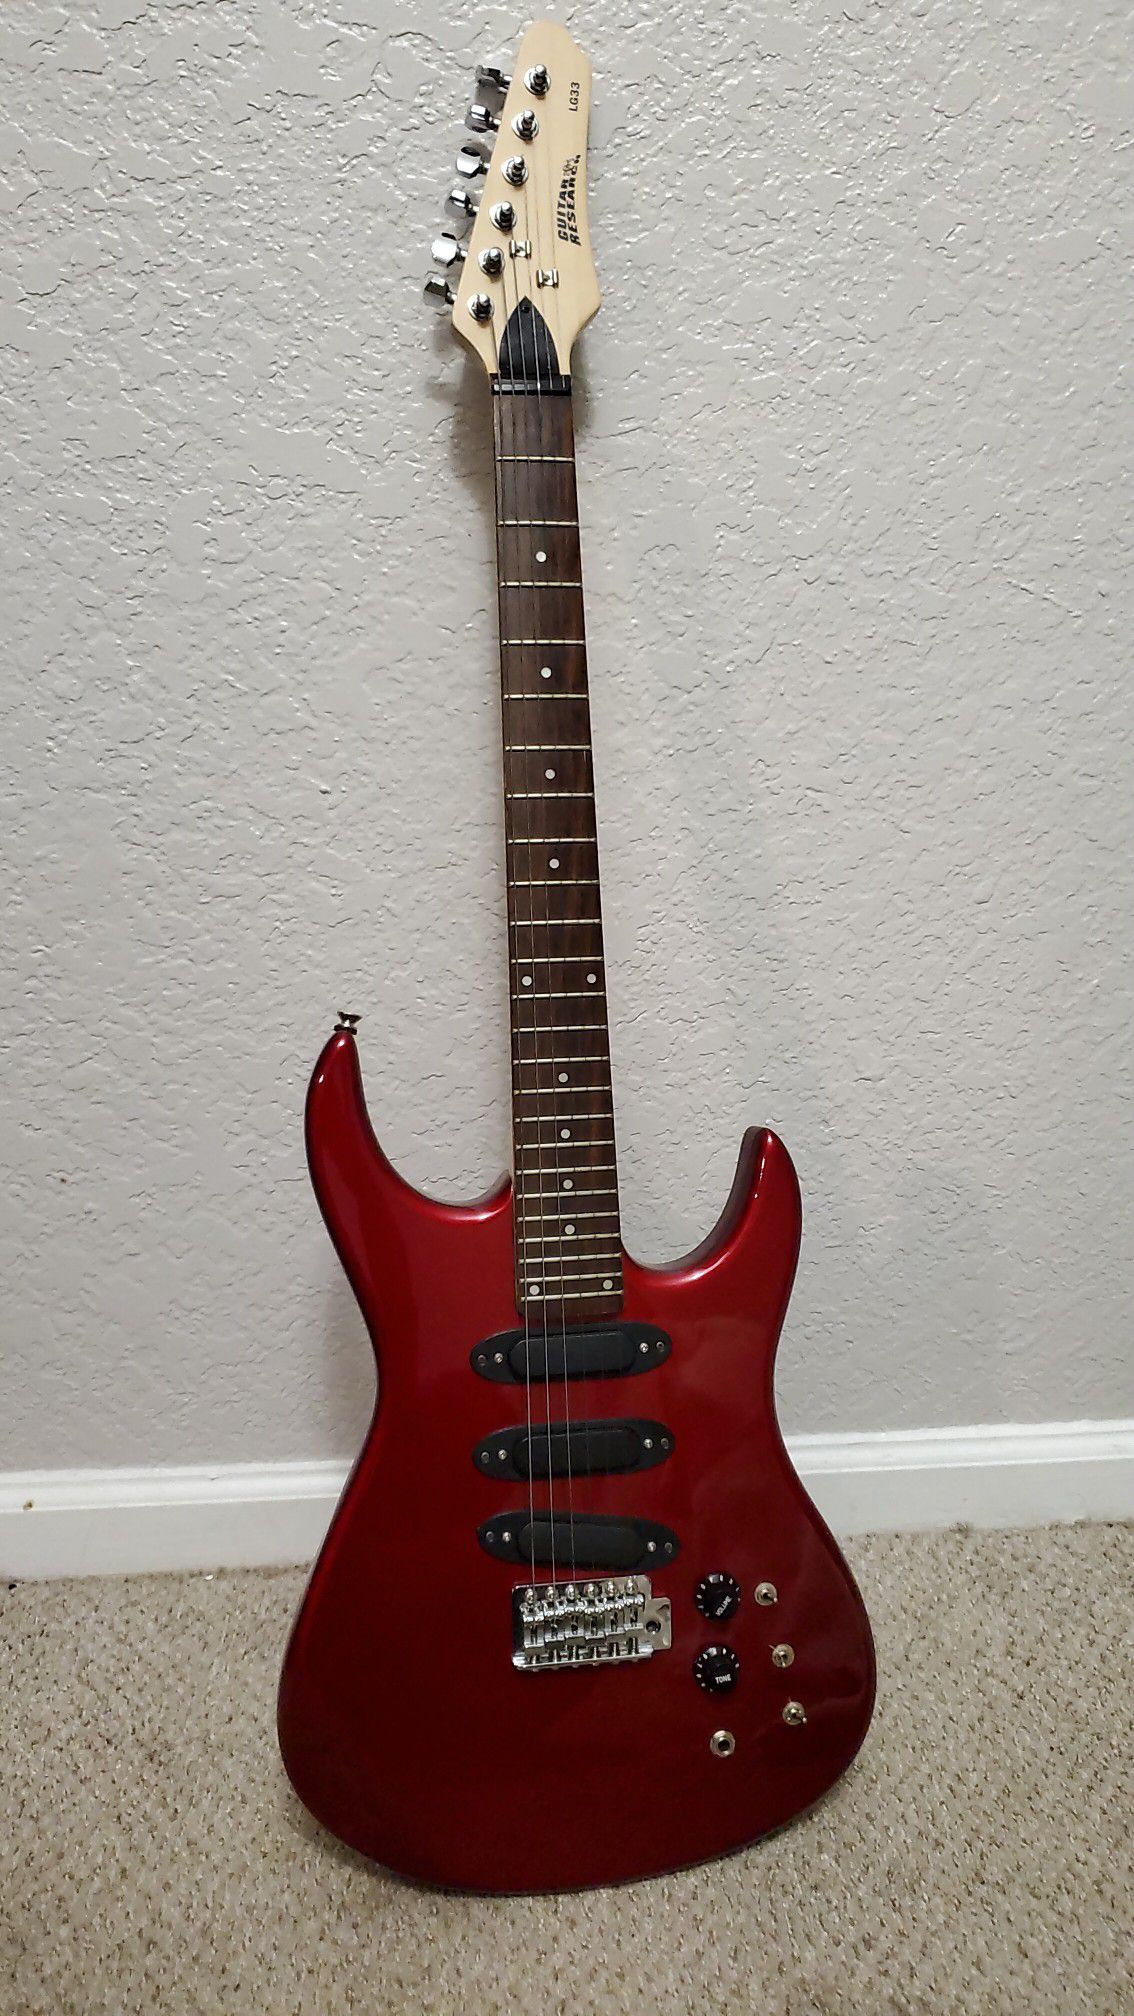 Shecter LG-33 electric guitar